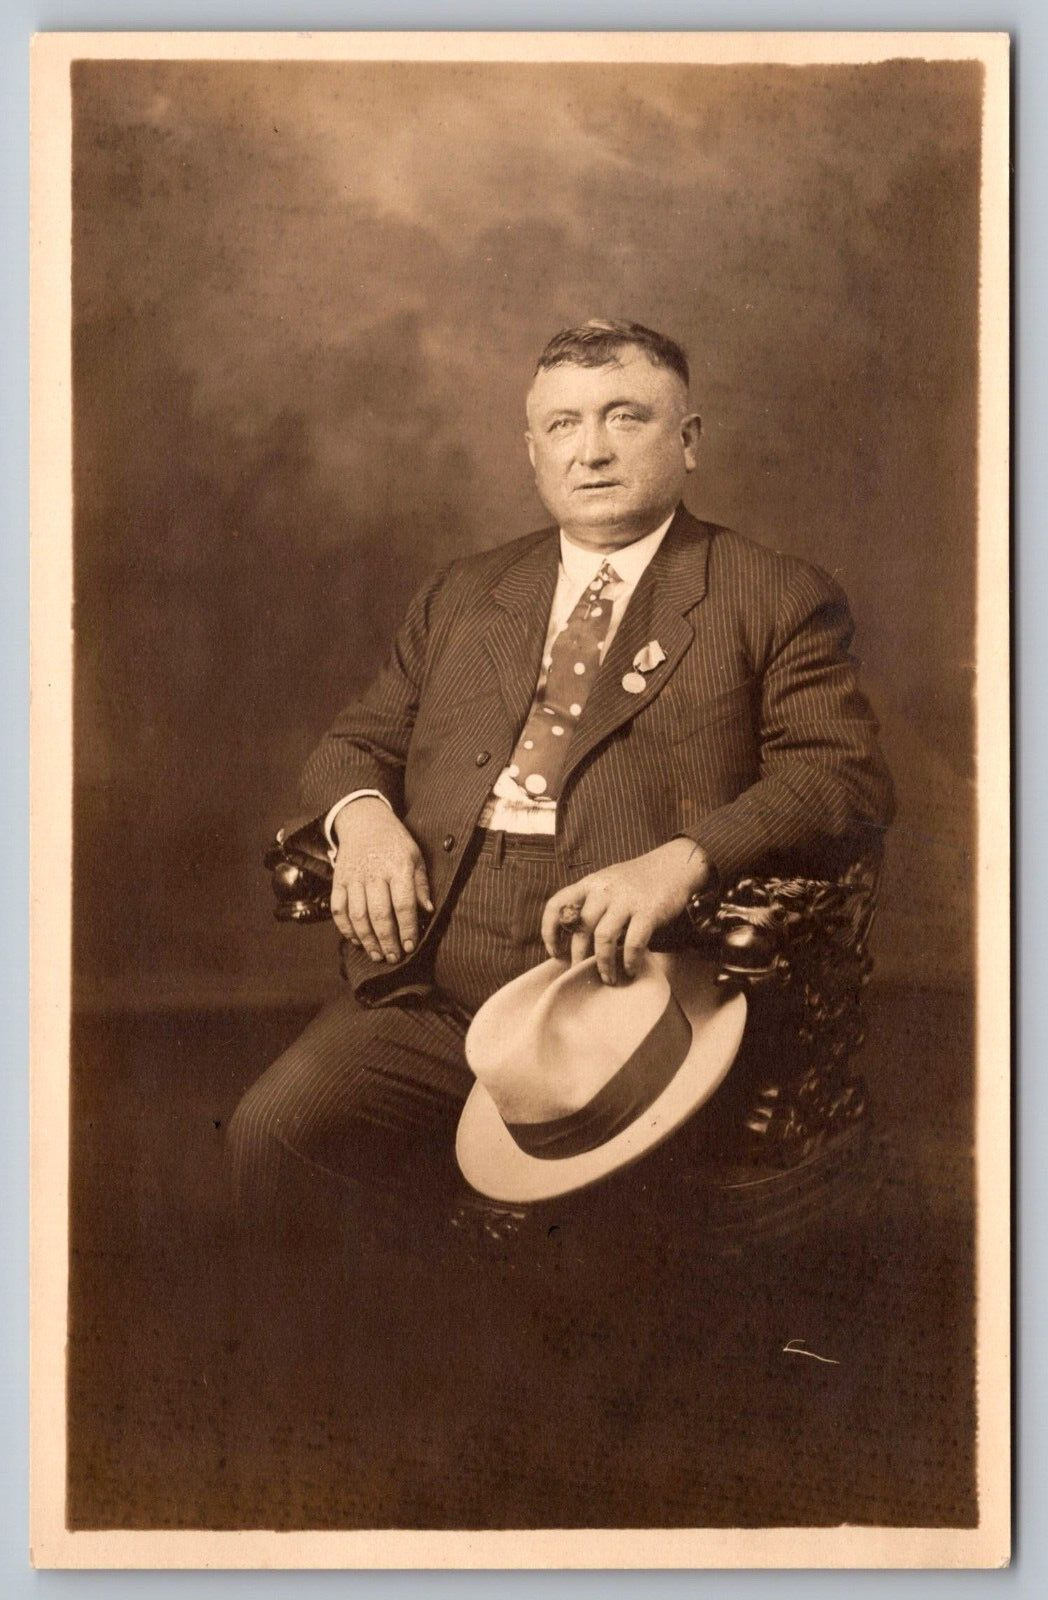 Man in Suit Seated in a Chair Antique RPPC Postcard Early 1900s (Dobkin Studio)